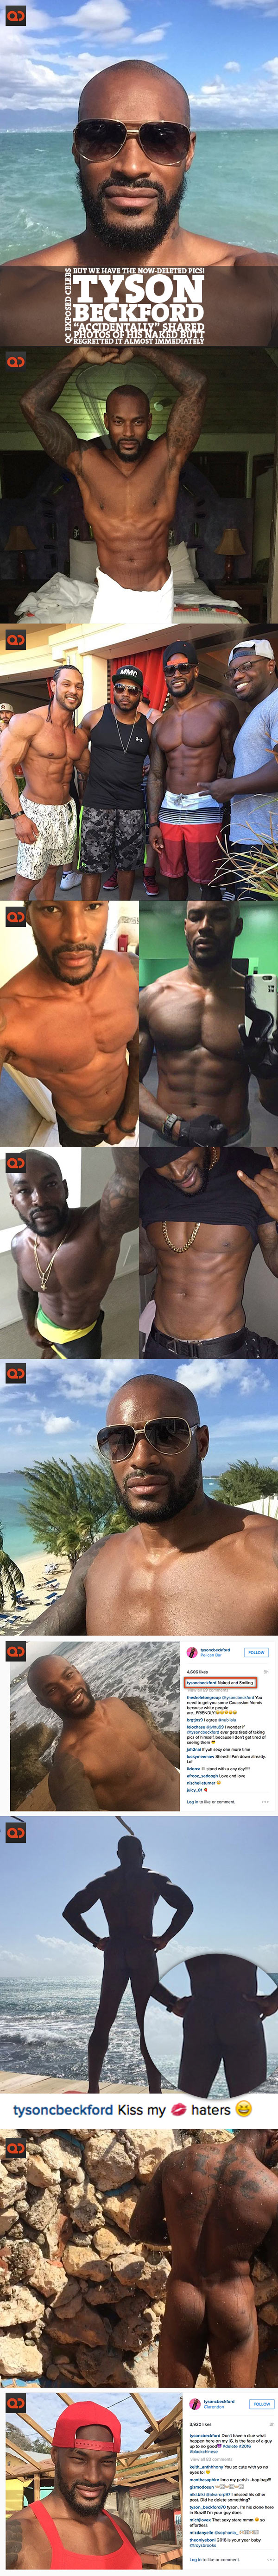 Tyson Beckford “Accidentally” Shared Photos Of His Naked Butt, Regretted It Almost Immediately - But We Have The Now-Deleted Pics!